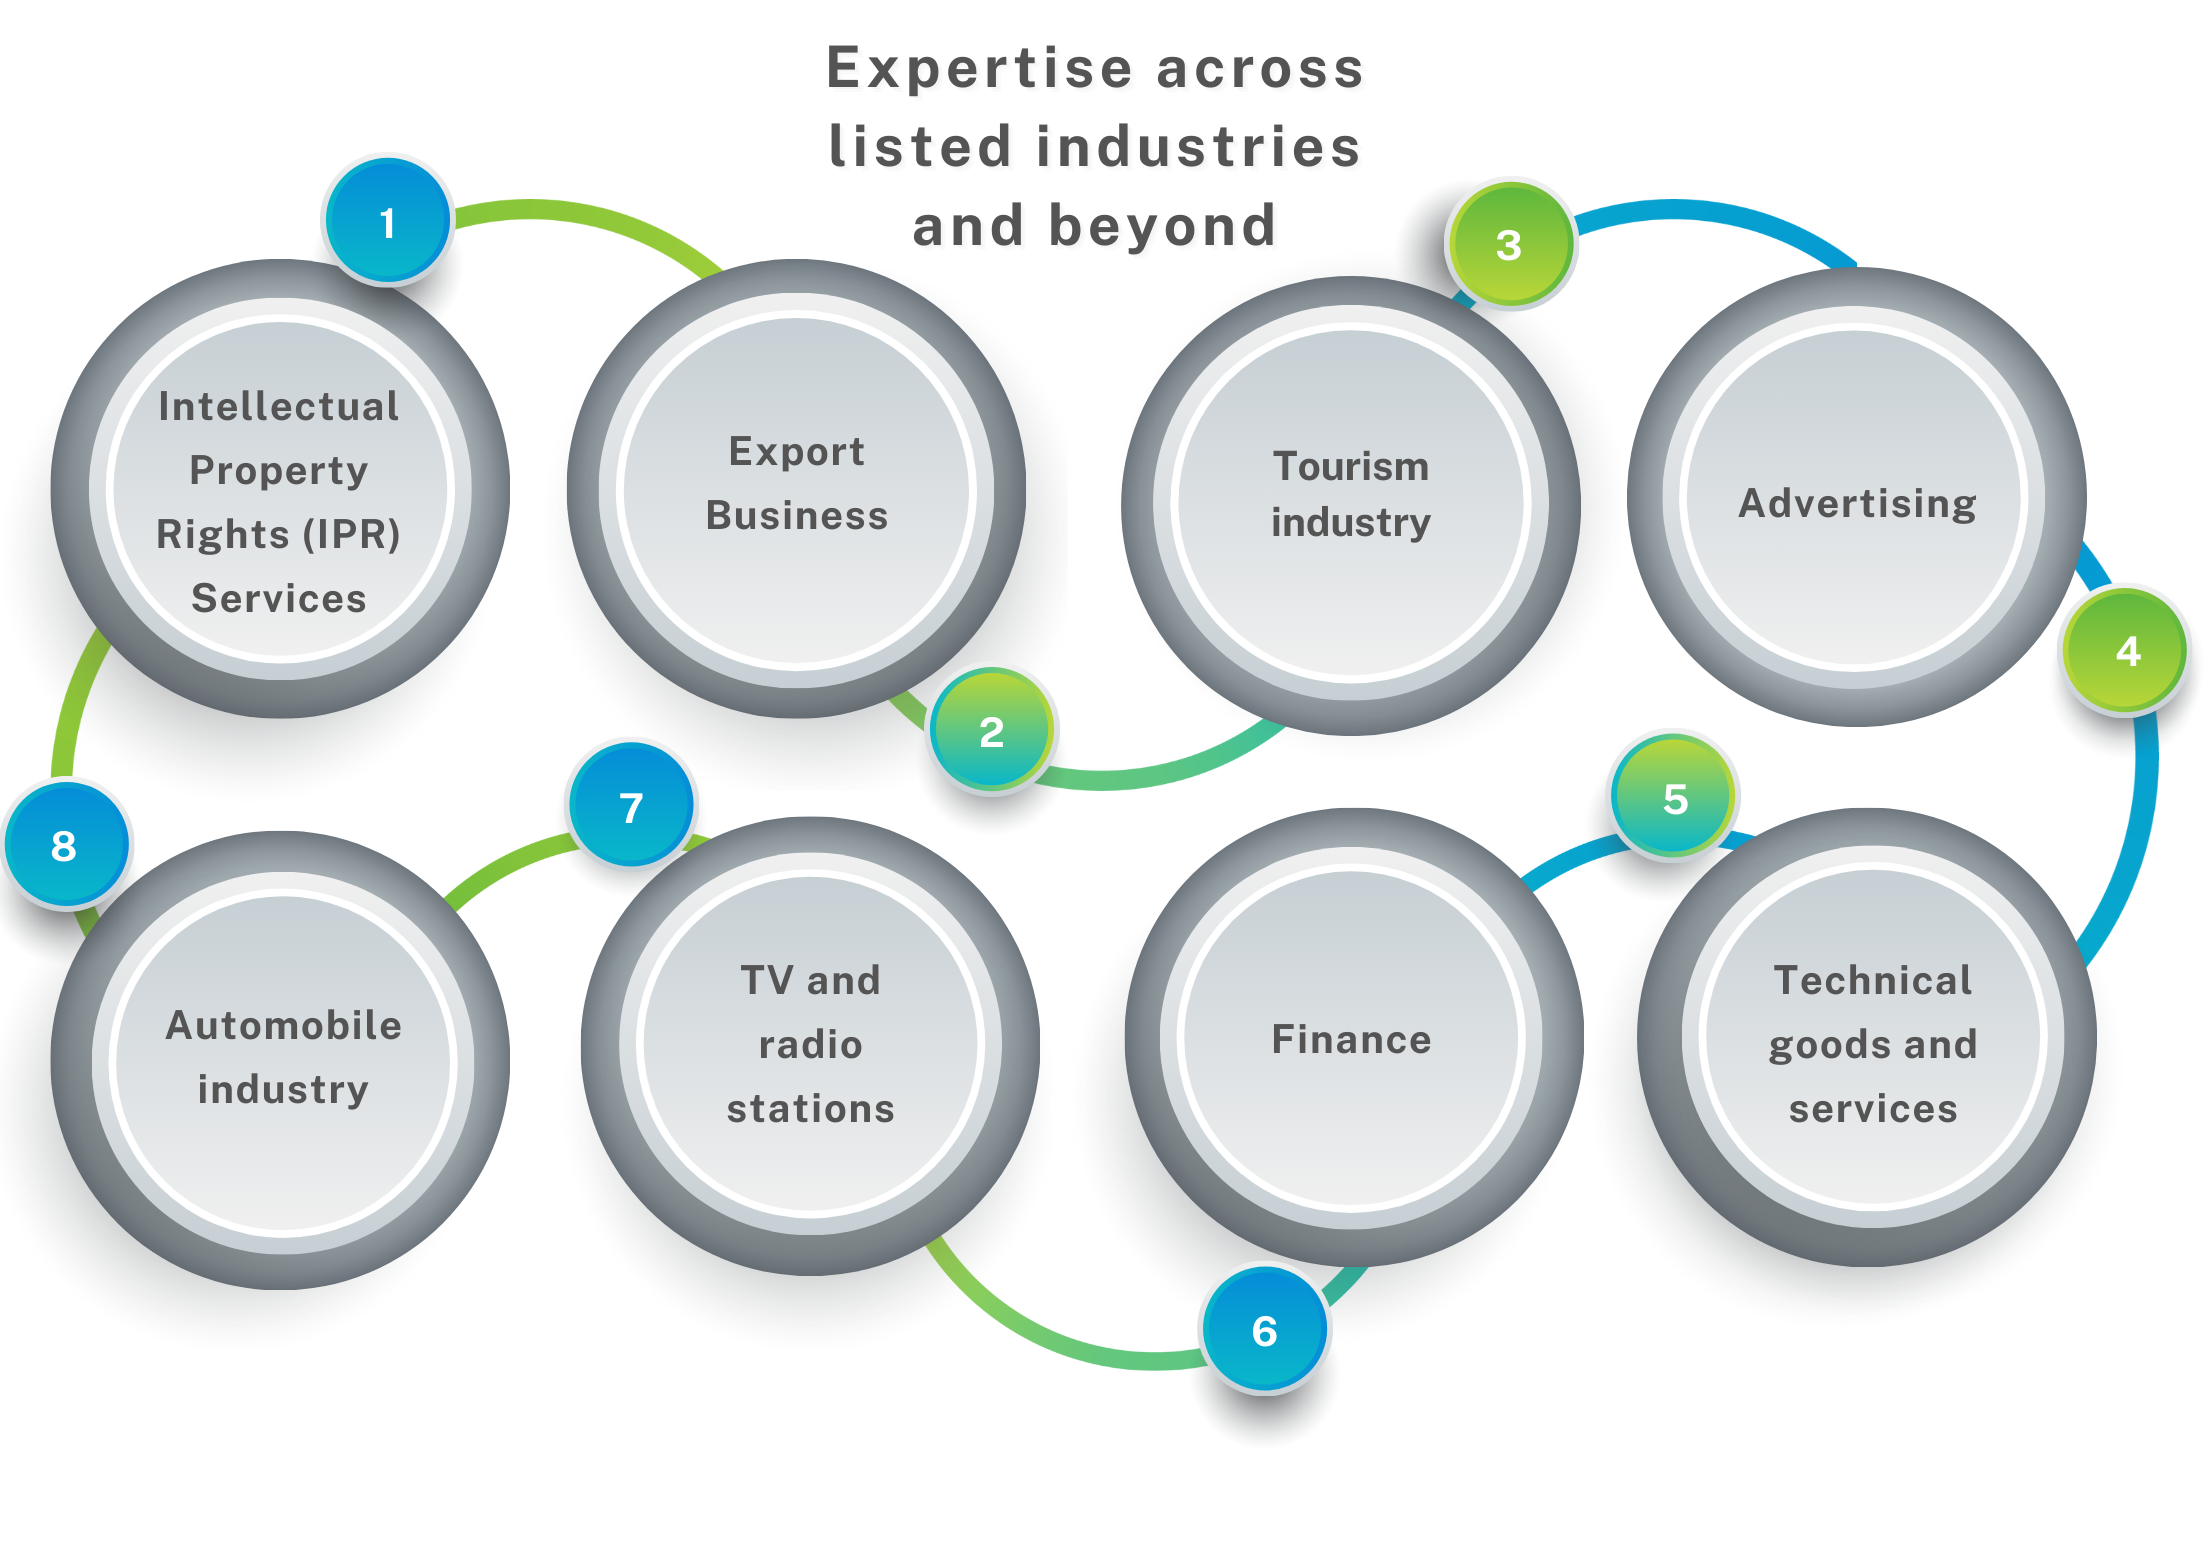 Expertise across listed industries and beyond: IPR services, Export business, Tourism industry, Advertising, Technical goods and services, Finance, TV and radio stations, Automobile industry.